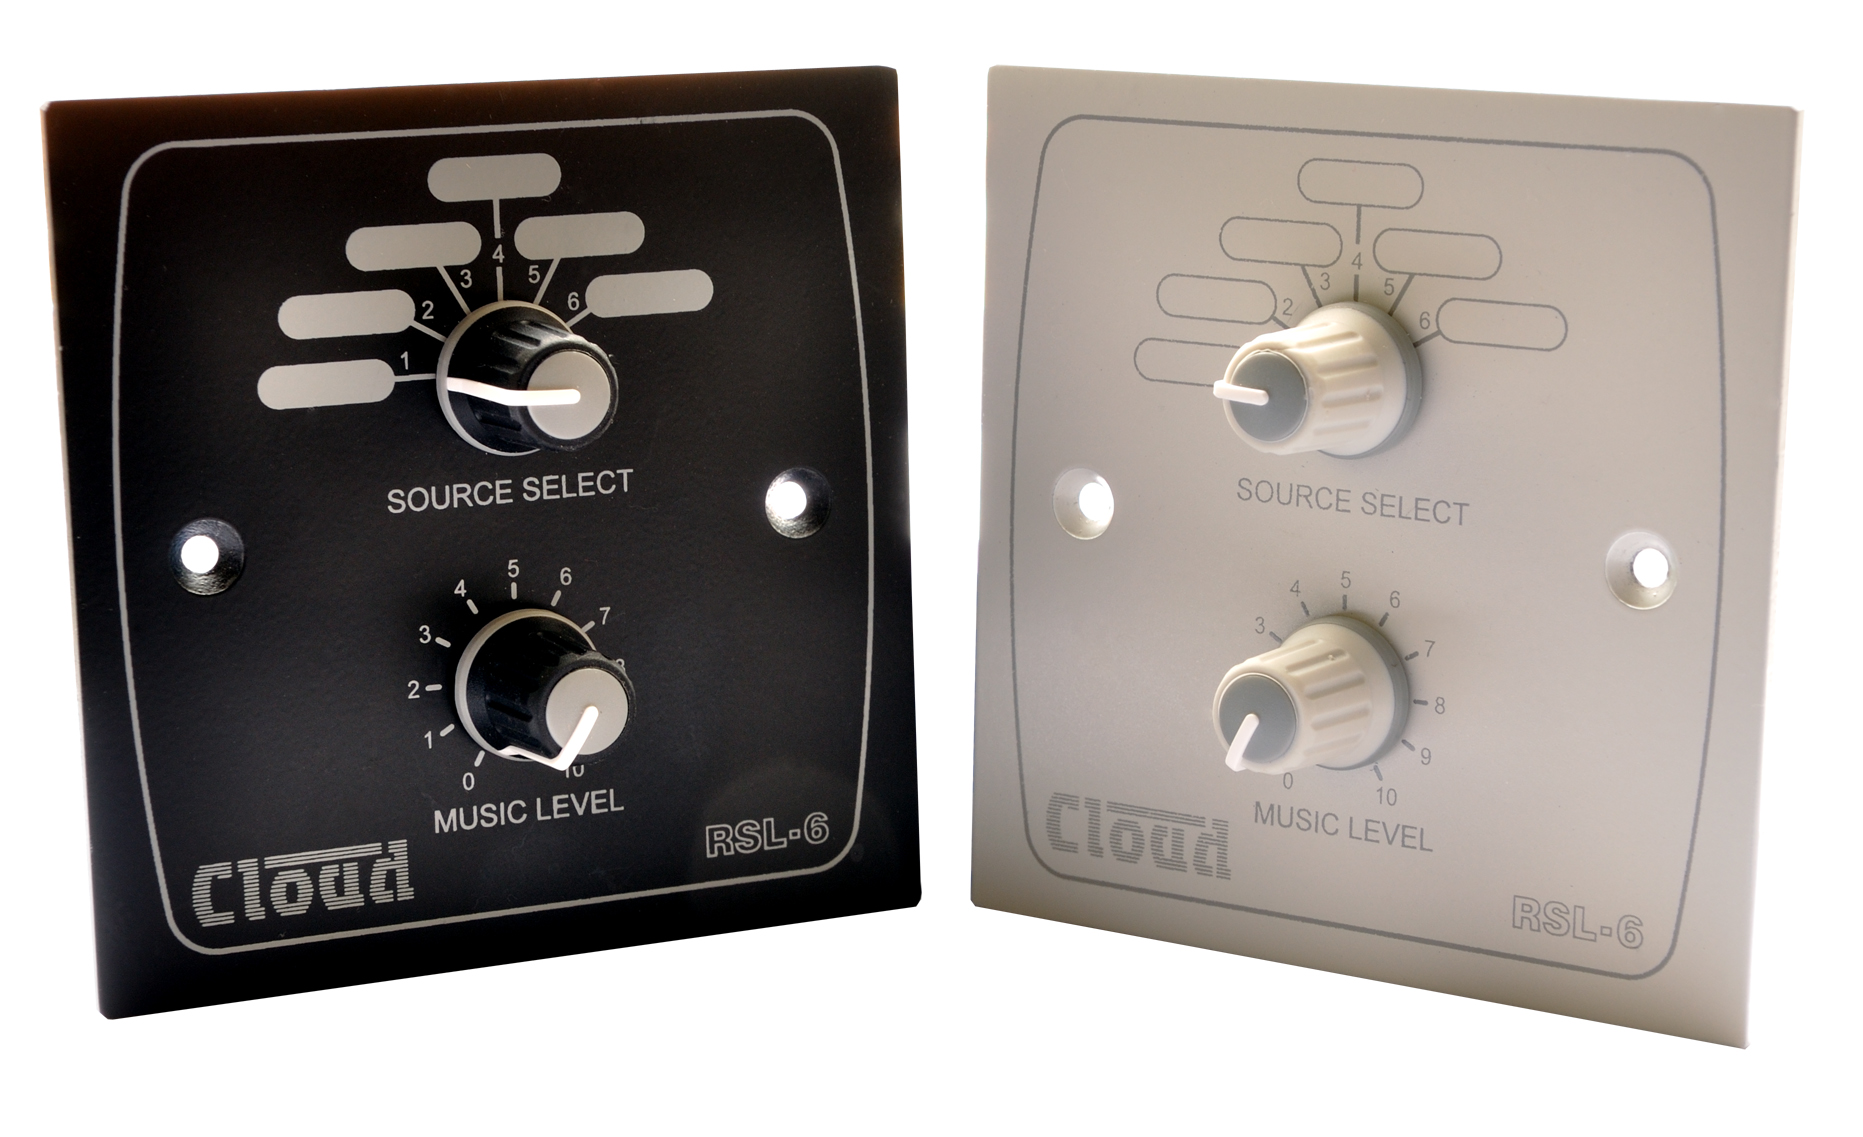 Cloud RSL-6 - Available in Black or White Finish from October 2012